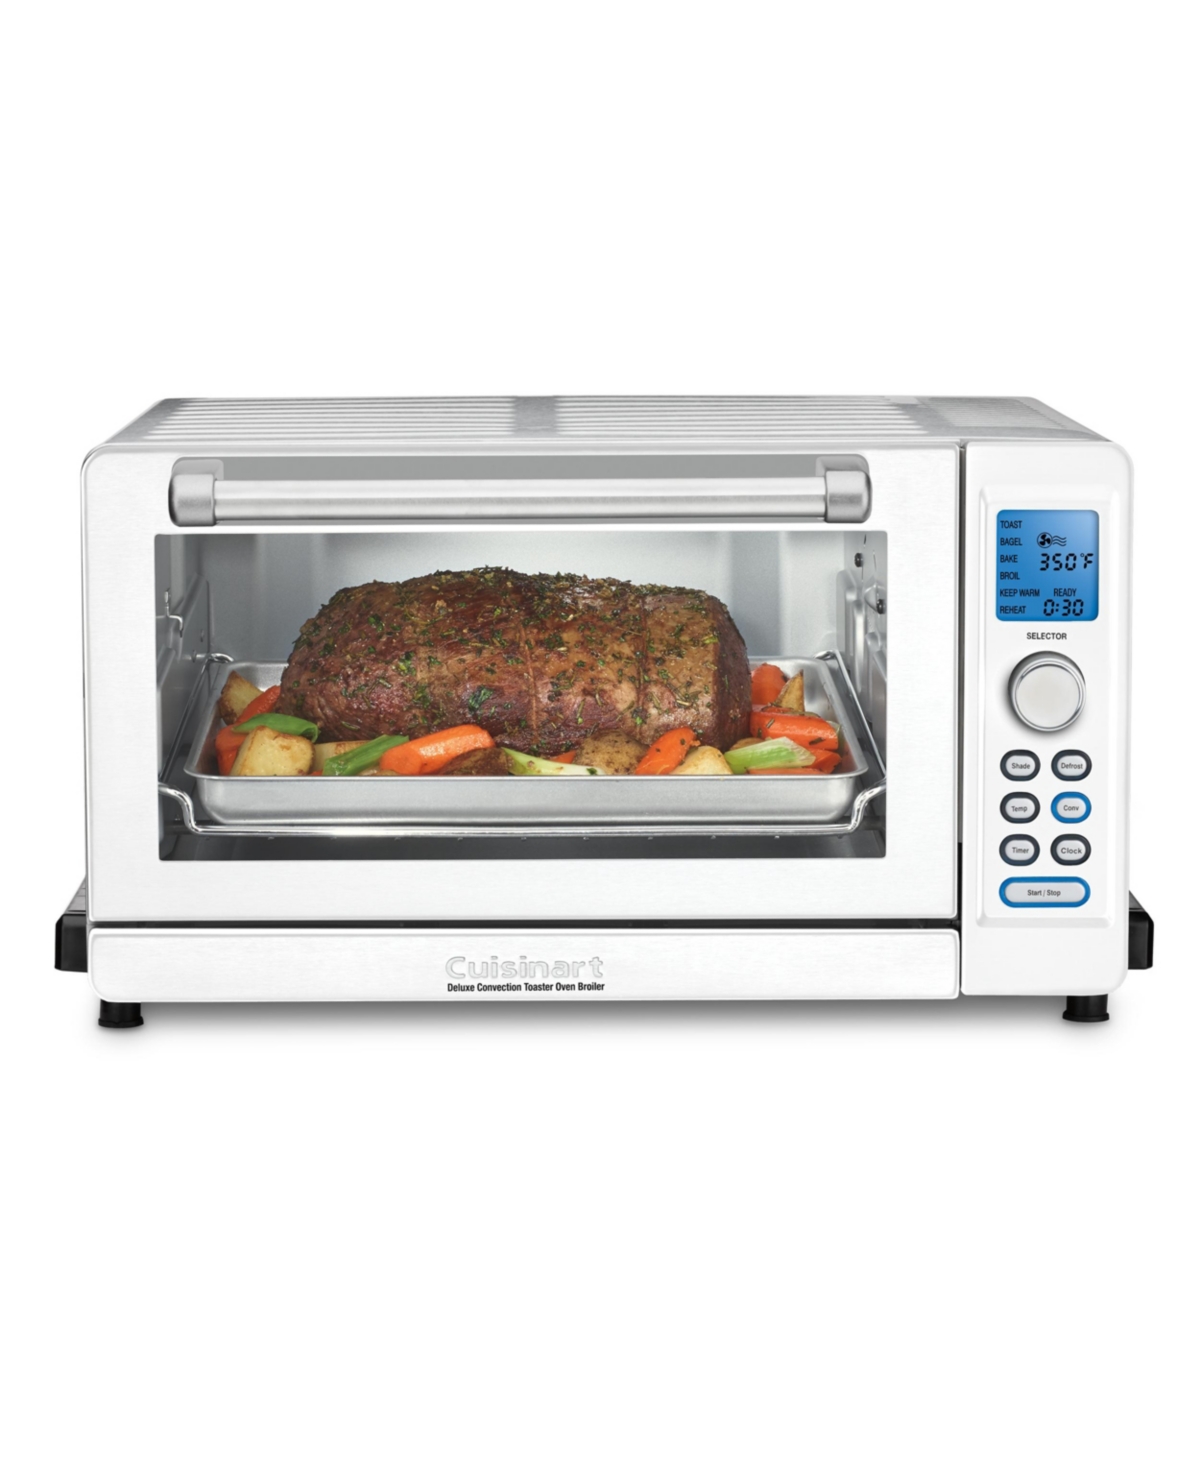 UPC 086279126917 product image for Cuisinart Tob-135WN Deluxe Convection Toaster Oven & Broiler | upcitemdb.com